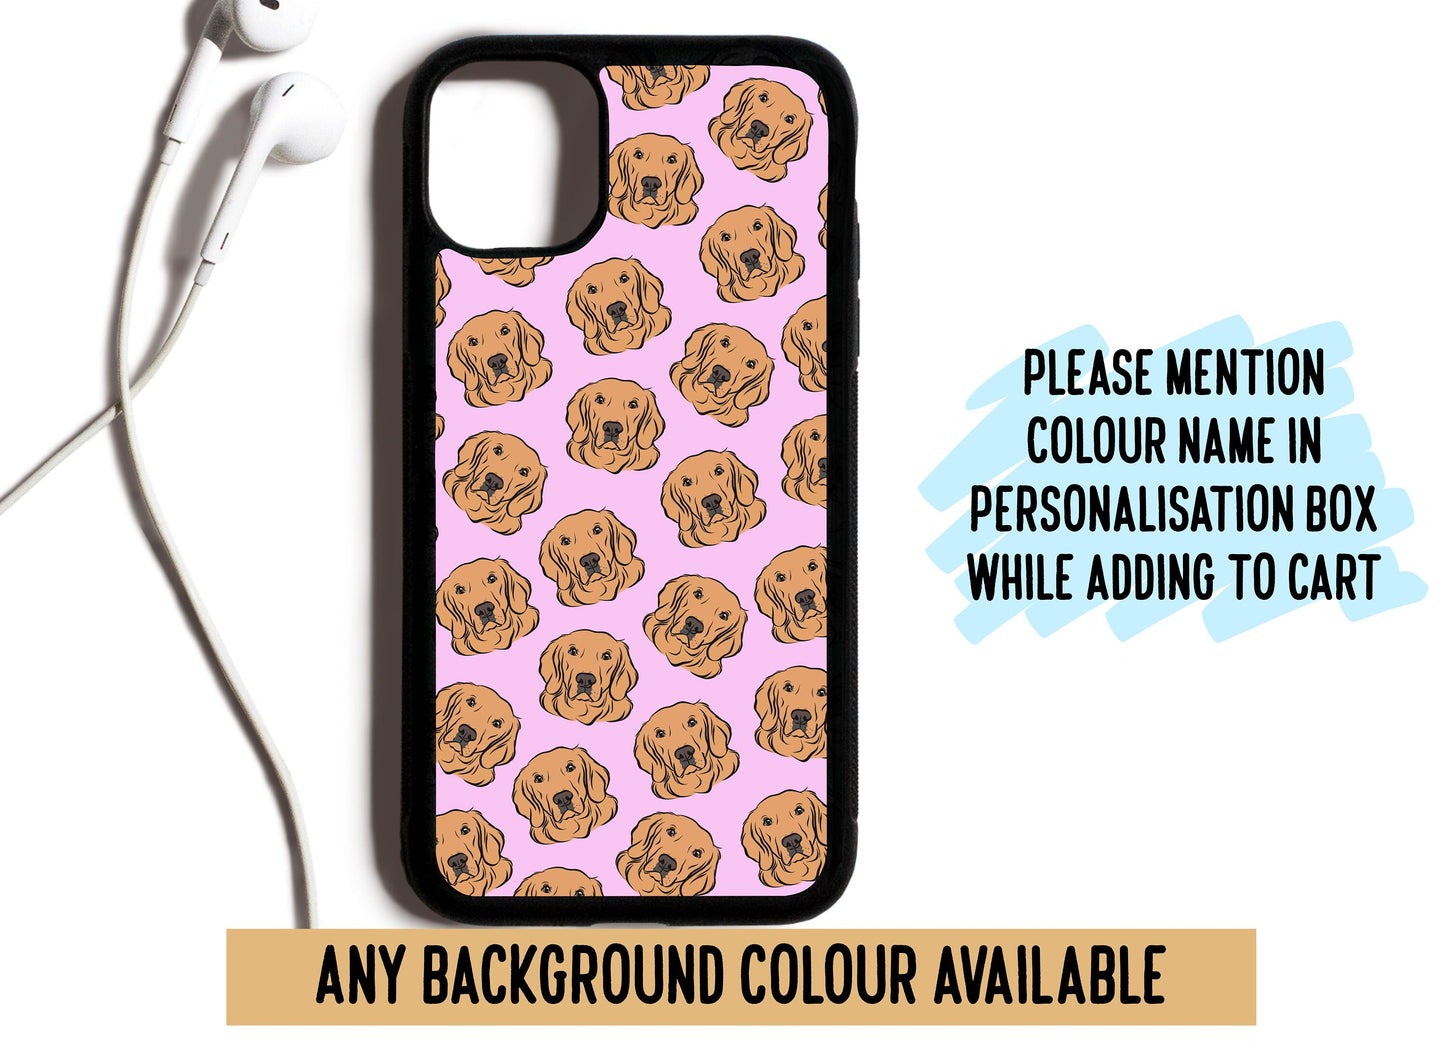 Golden Retriever Face Phone Case/ Personalised Dog Portrait Phone Cover/ Stylish Golden Retriever Face Phone Case/ Adorable Dog Lovers Gift